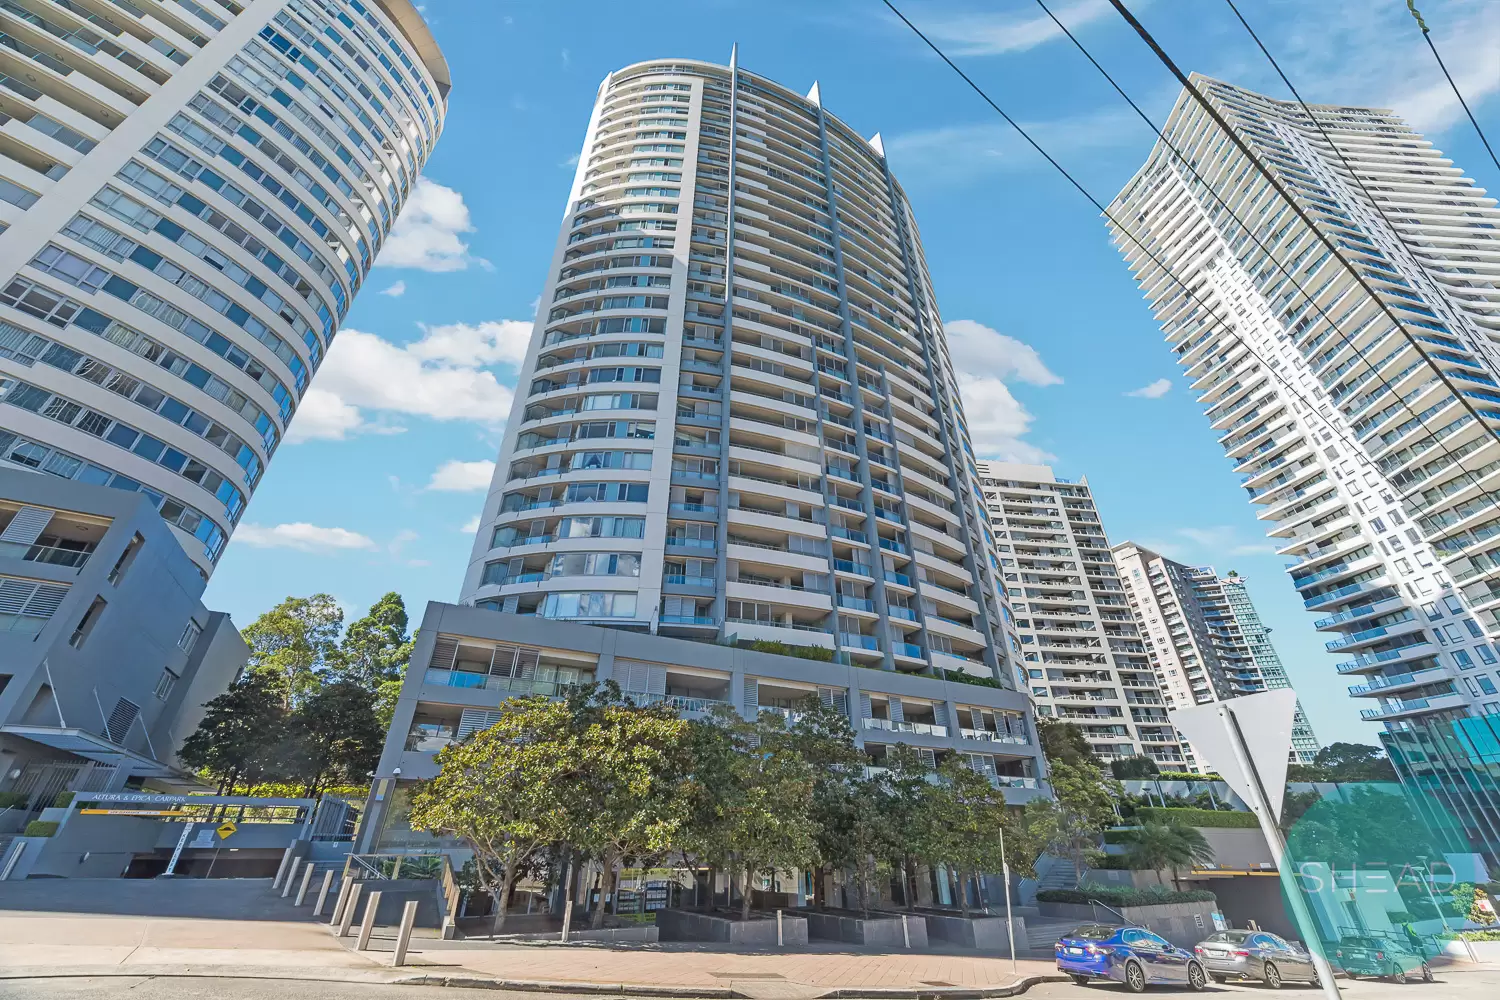 2807/9 Railway Street, Chatswood For Lease by Shead Property - image 1